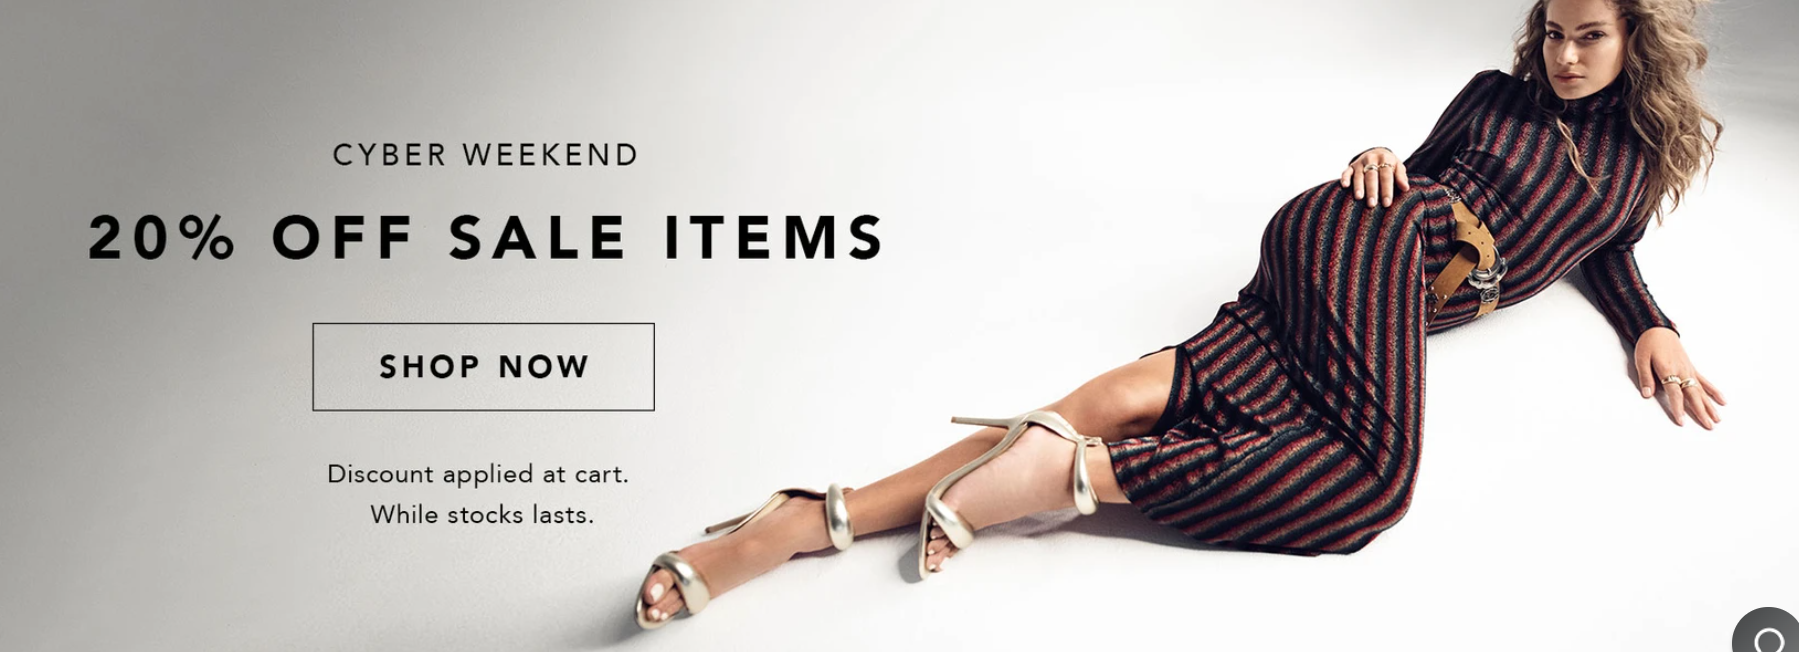 Tony Bianco Cyber weekend 20% OFF on sale items including shoes & accessories